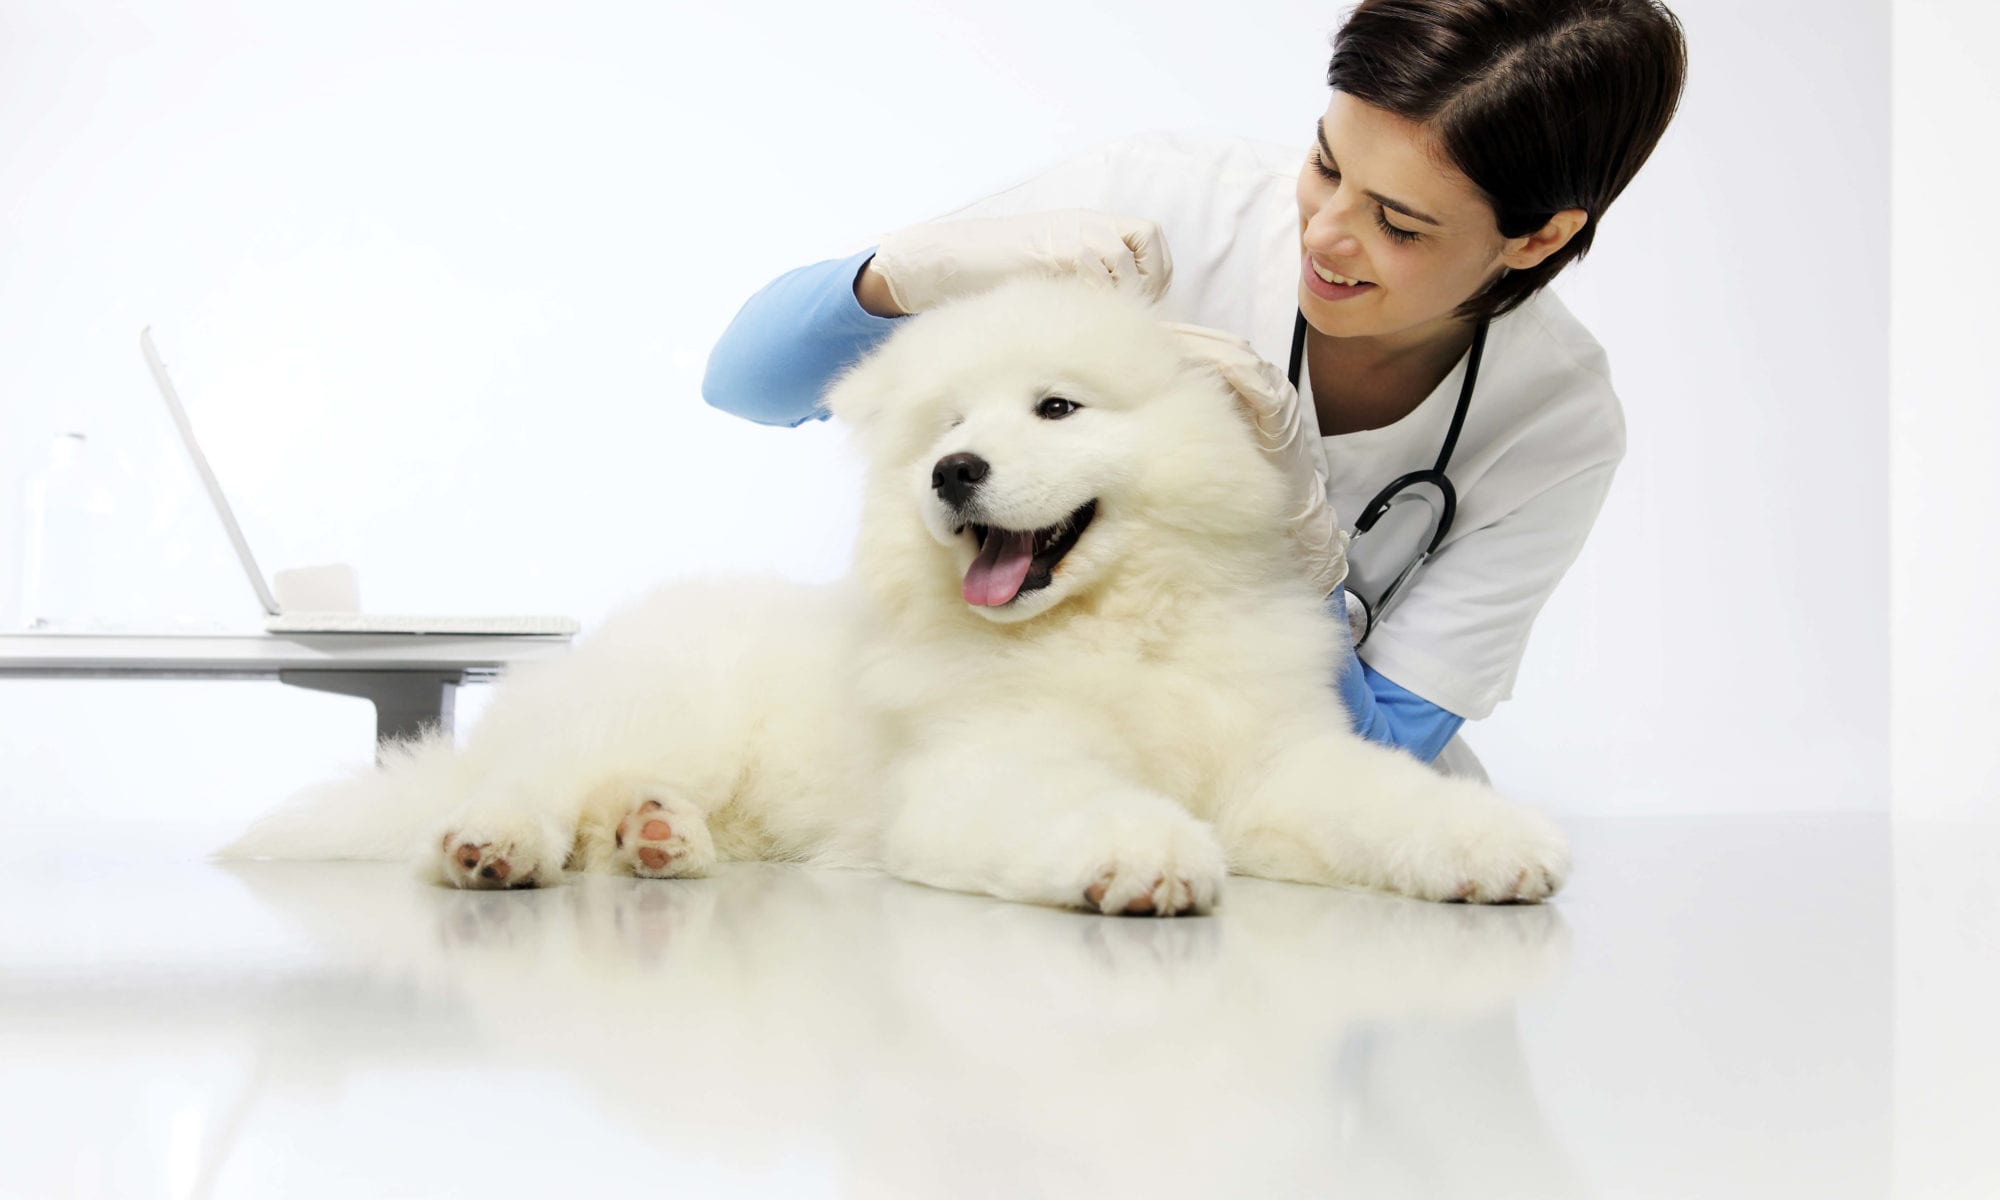 reduce my dog’s stress at the Vet and Groomers